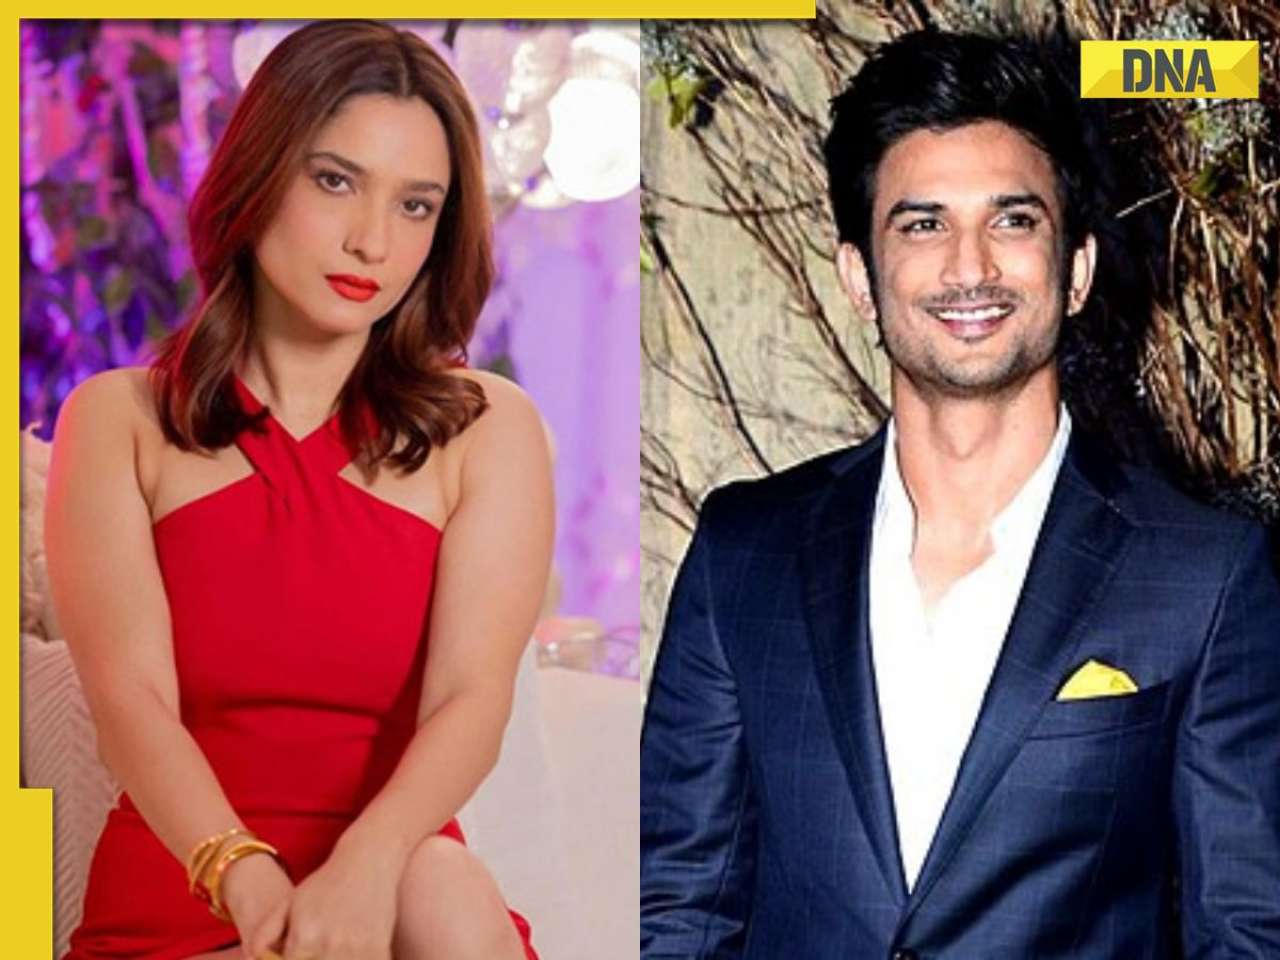 'Justice milega': Ankita Lokhande talks about Sushant Singh Rajput, reveals she's still connected with his family